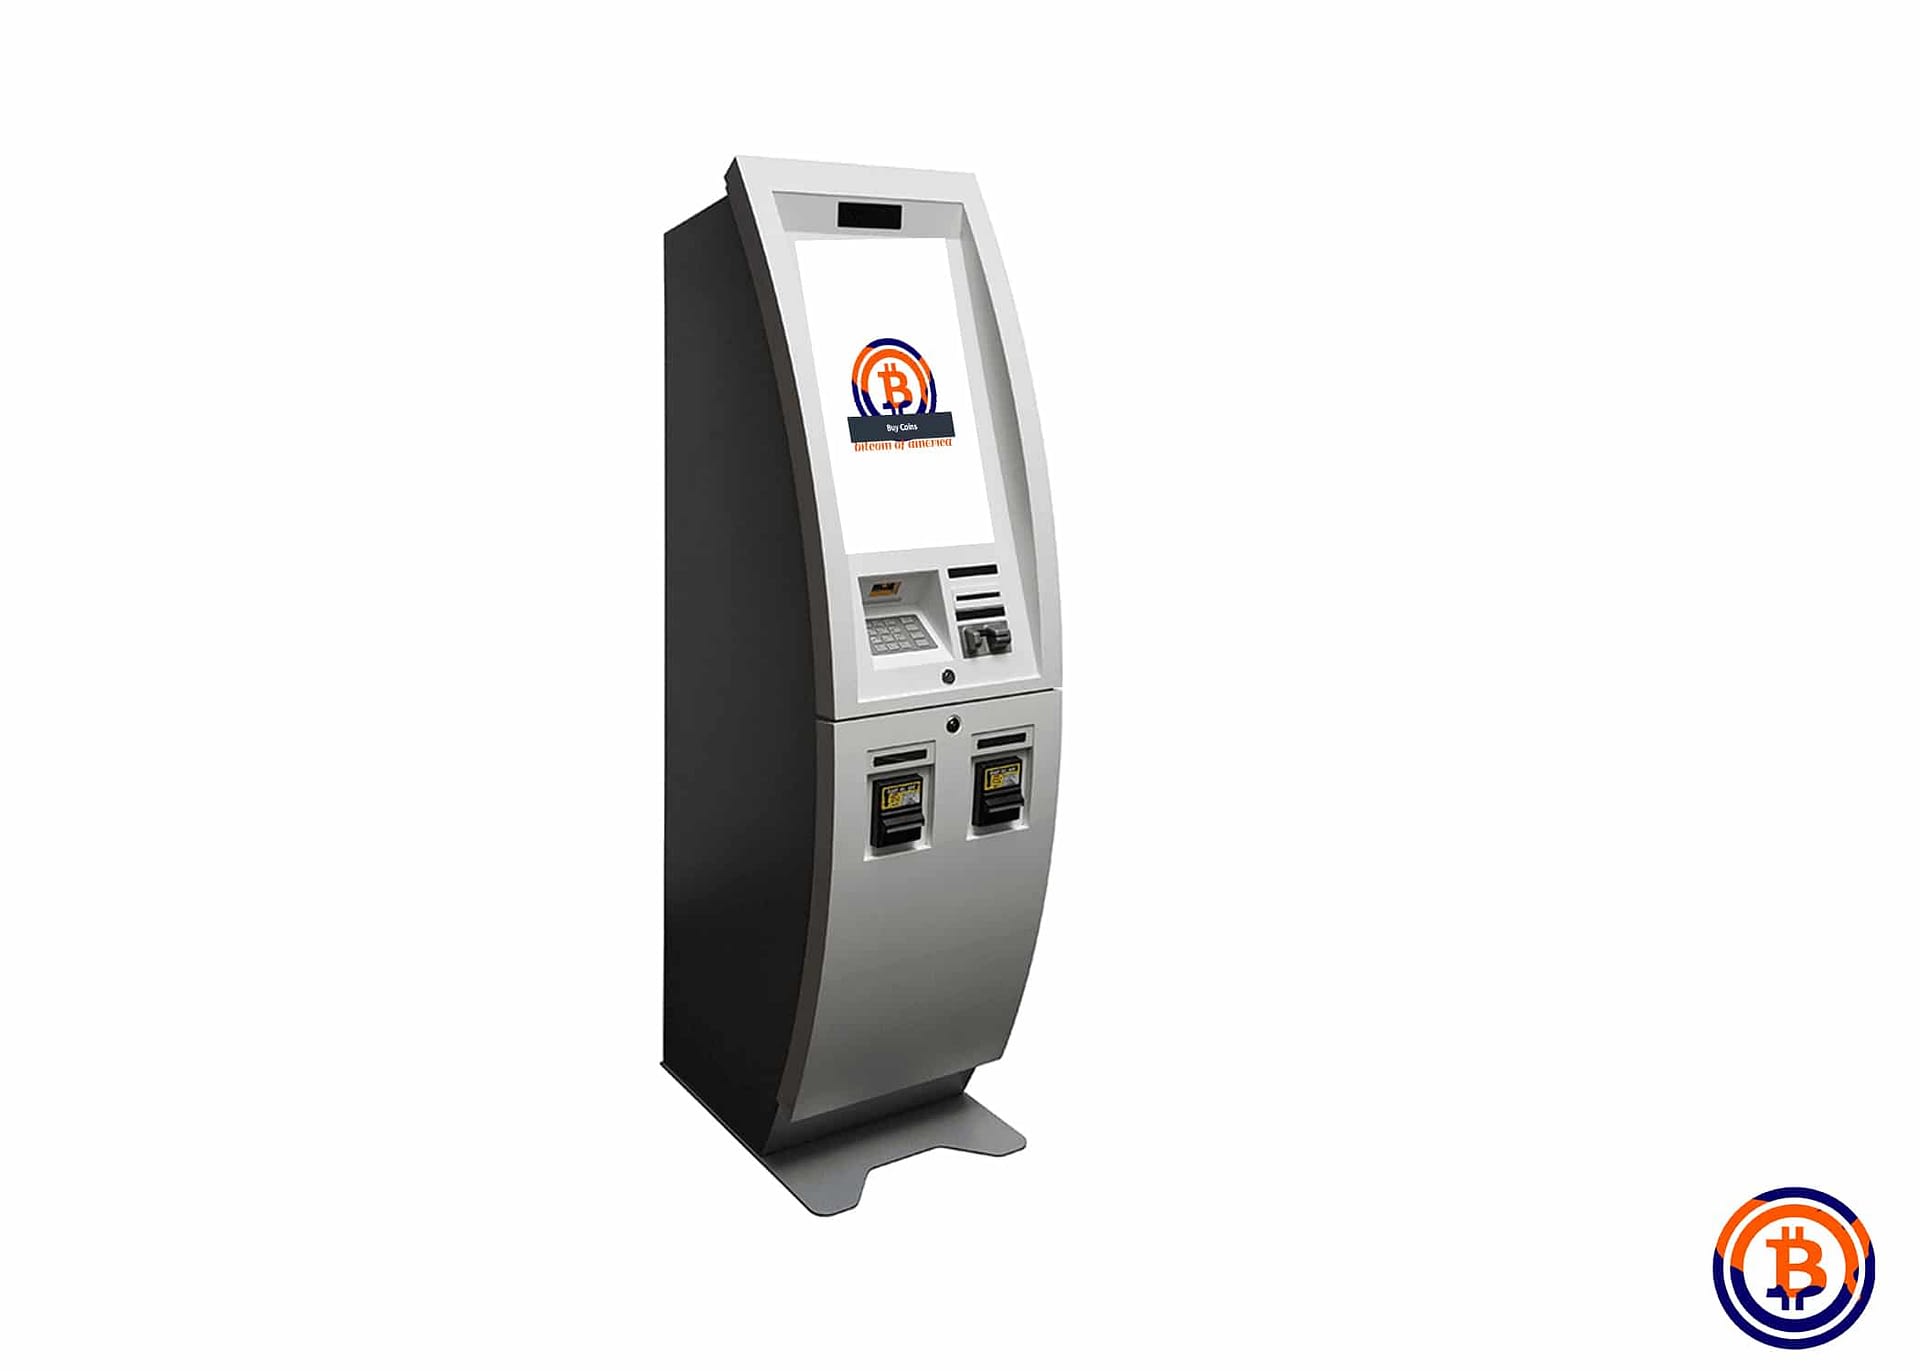 Rise Of Bitcoin Atms - 